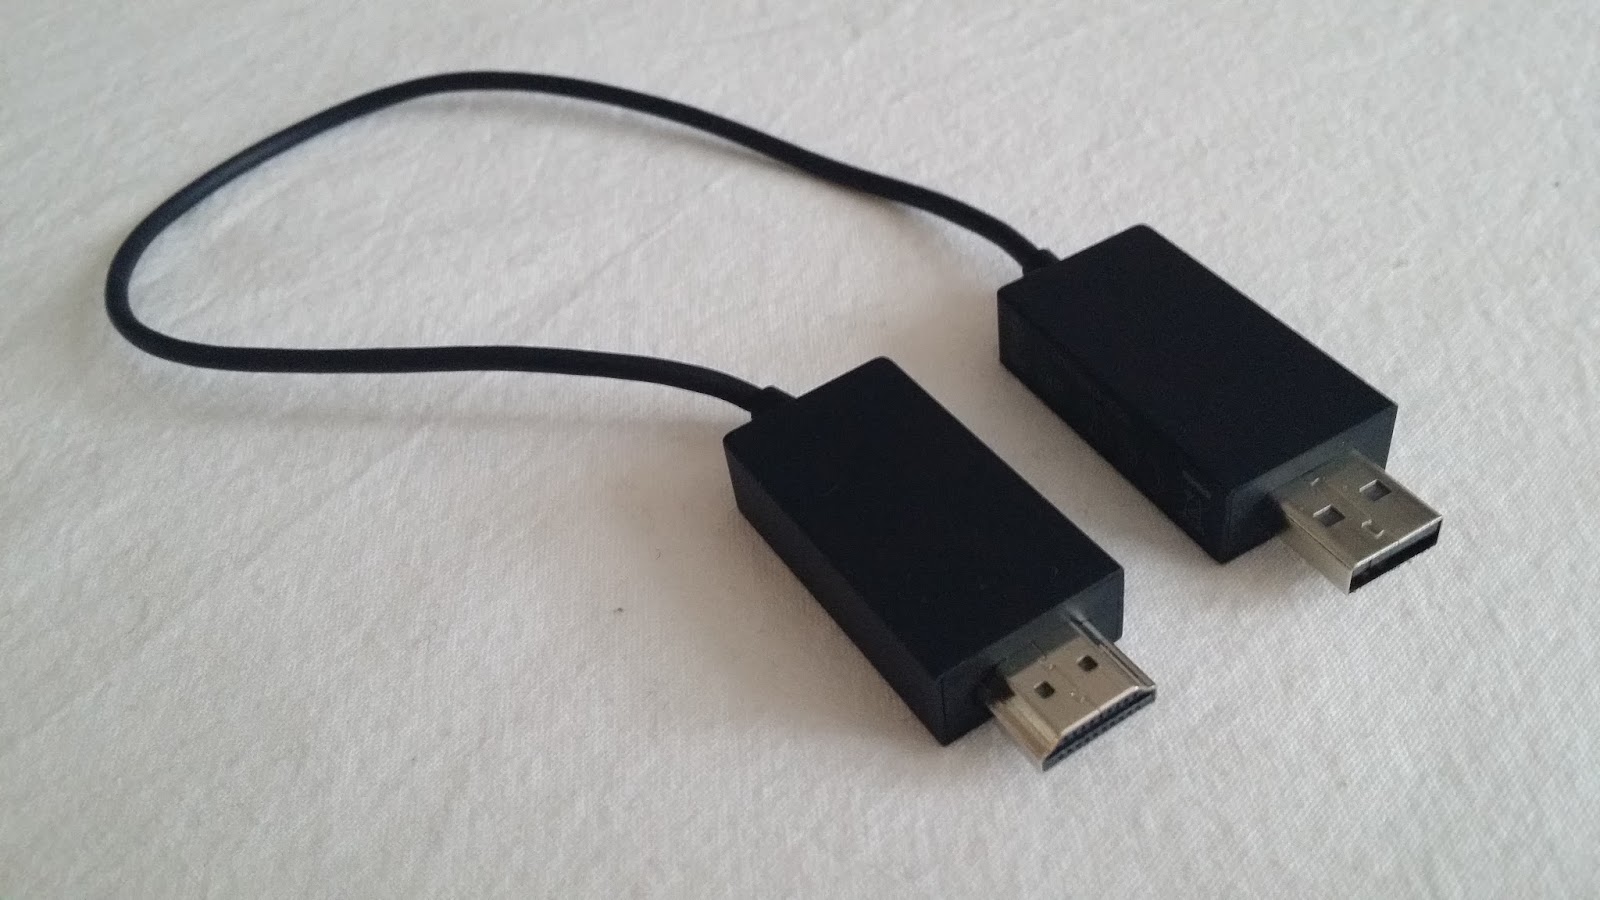 Can mac connect to microsoft wireless display adapter